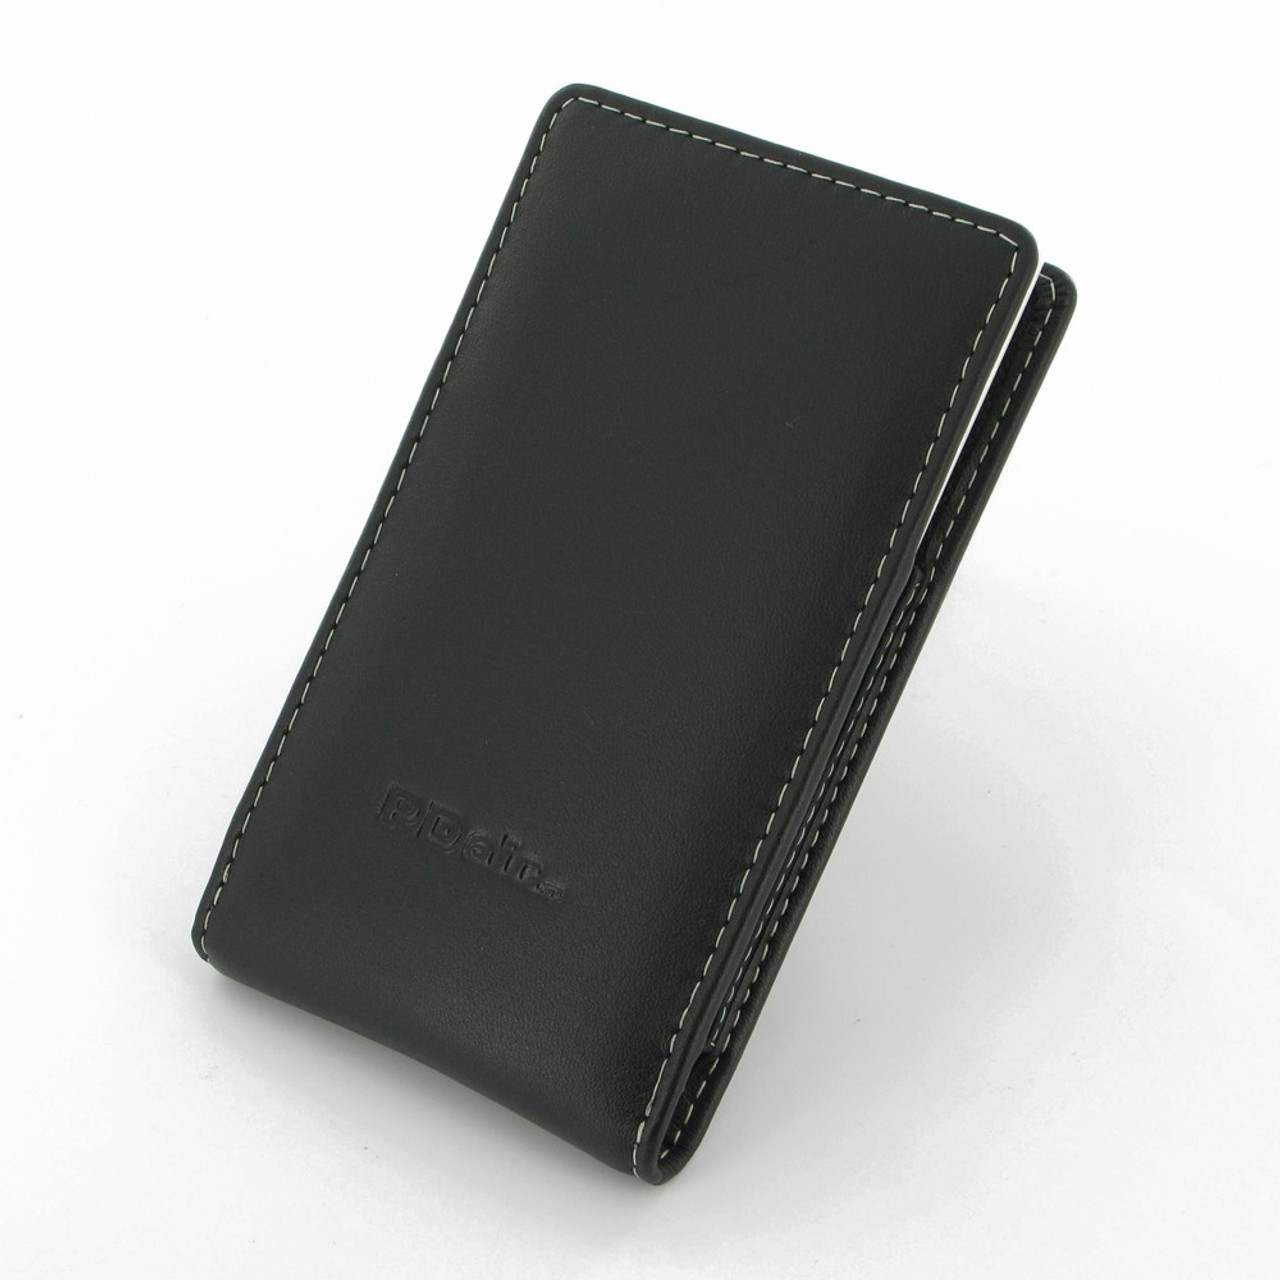 PDair Black Leather Vertical Pouch for Nokia Lumia 920